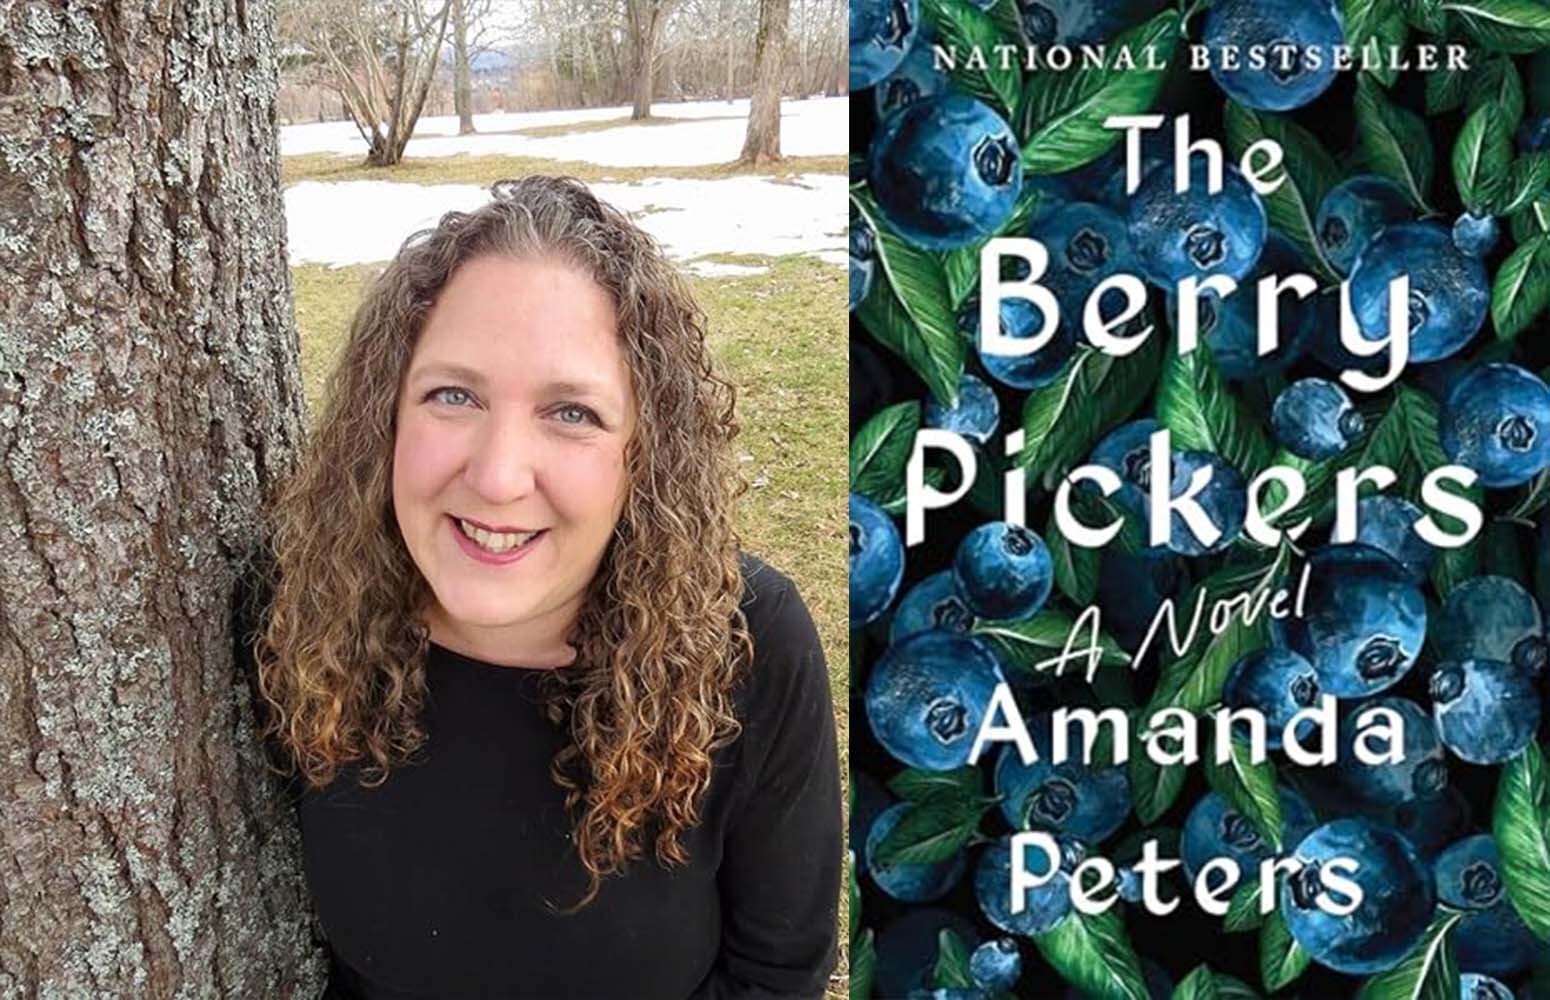 Author of ‘The Berry Pickers’ explores belonging and Indigenous stories in novel